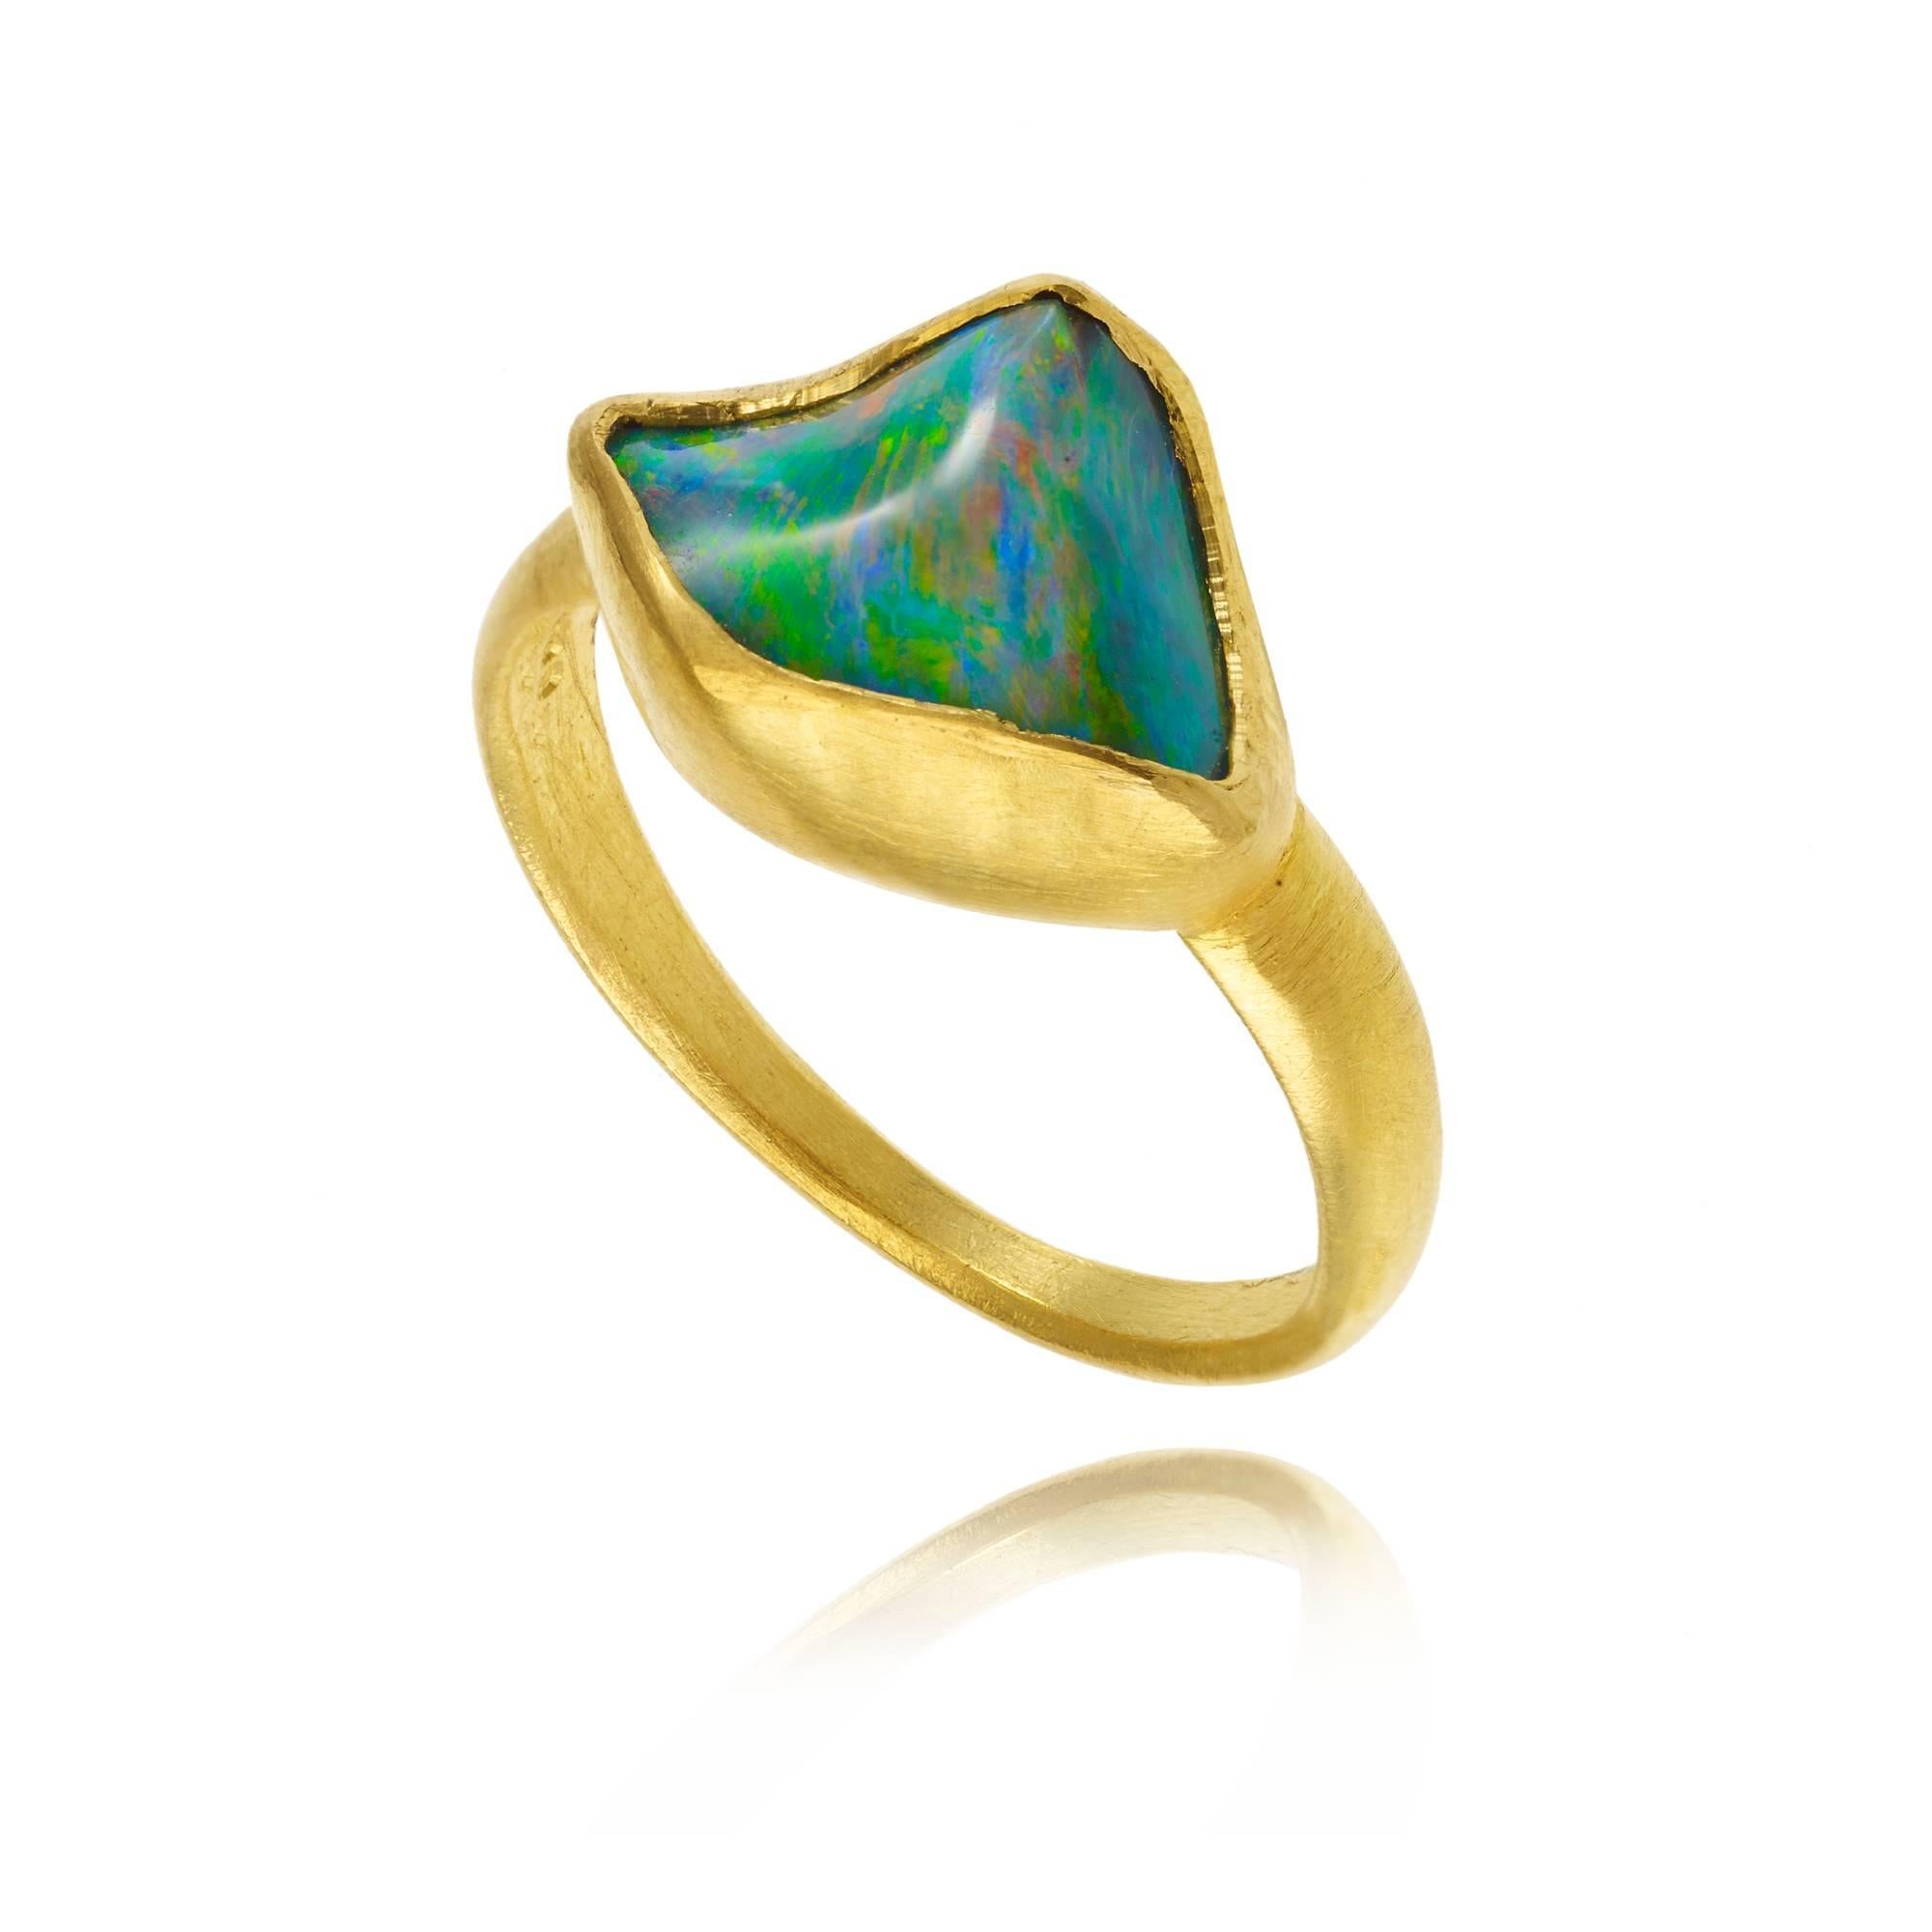 This classic Pippa Small design, inspired by the simplicity of Ancient Greek Gold work, features an 18 kt Gold discrete setting wrapped around a stunning Opal.